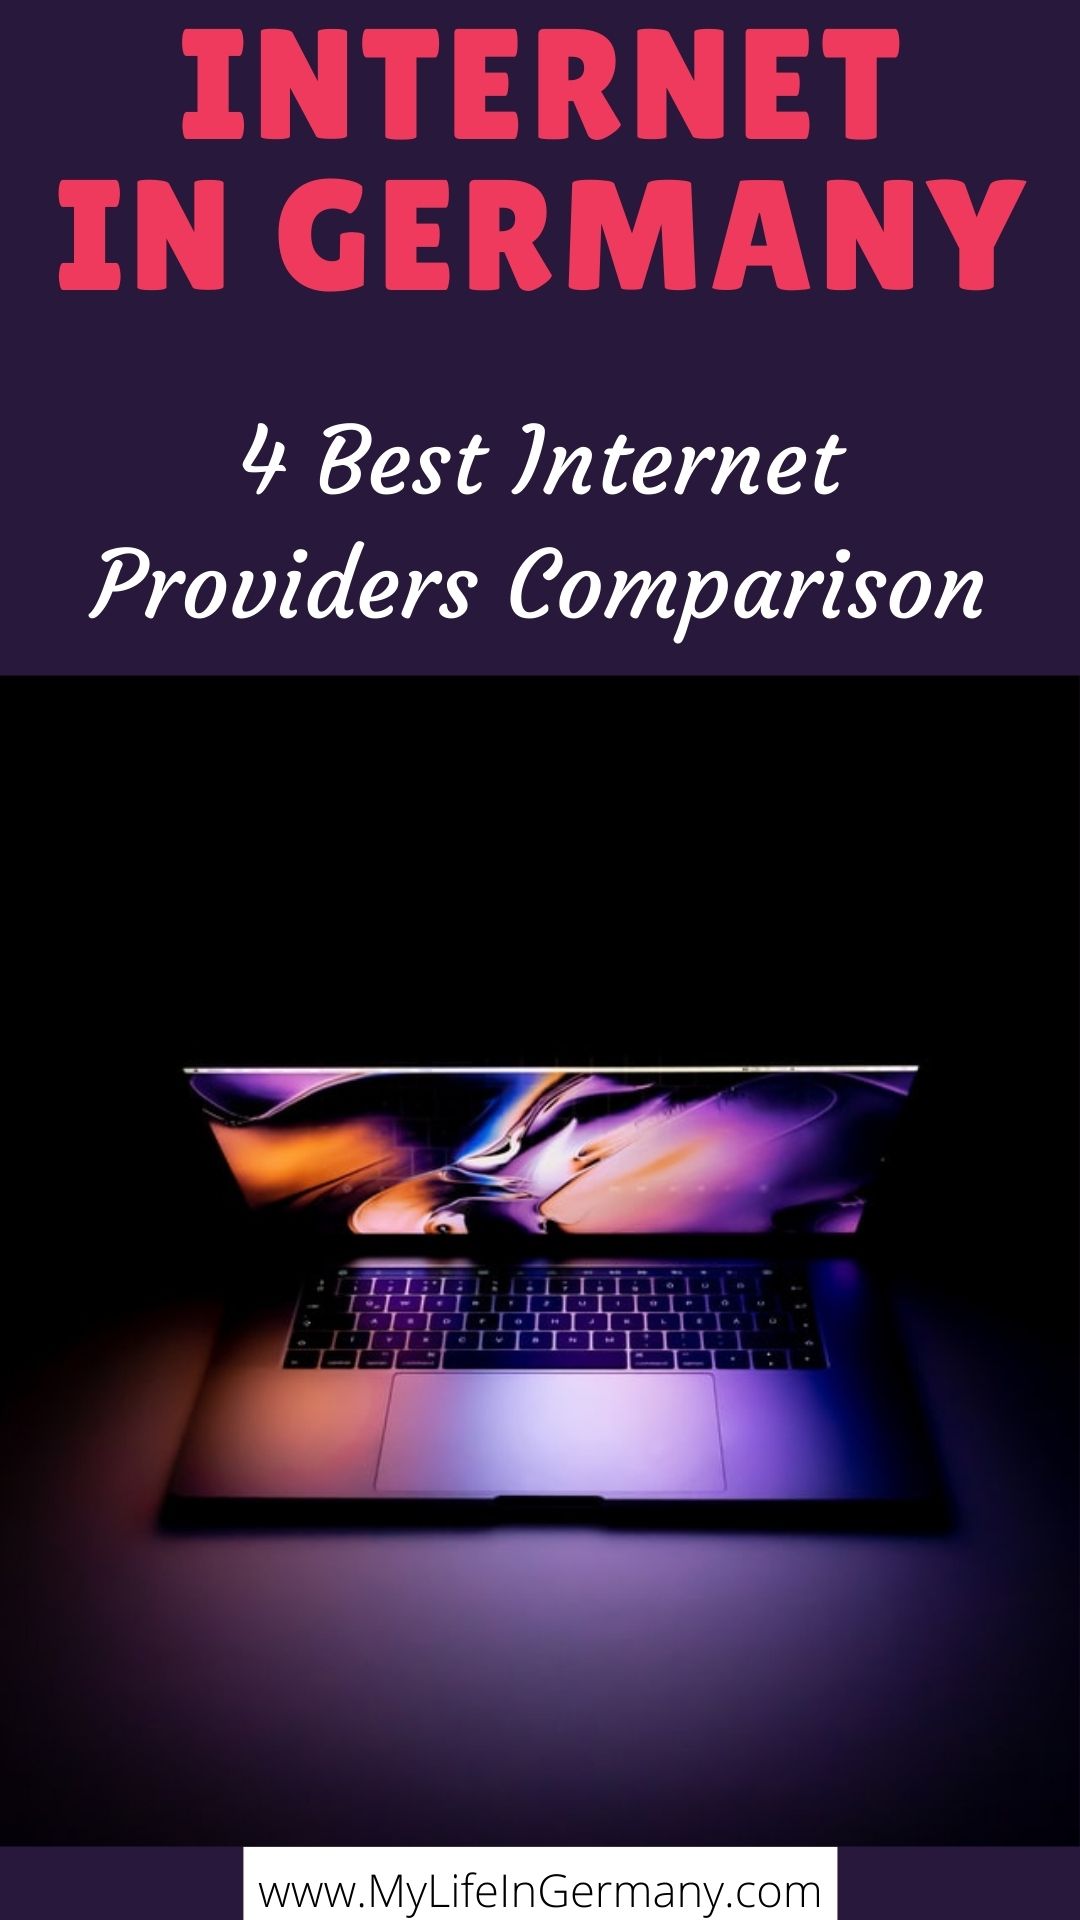 pinterest image edited_internet in germany_4 best internet providers comparison_my life in germany_hkwomanabroad